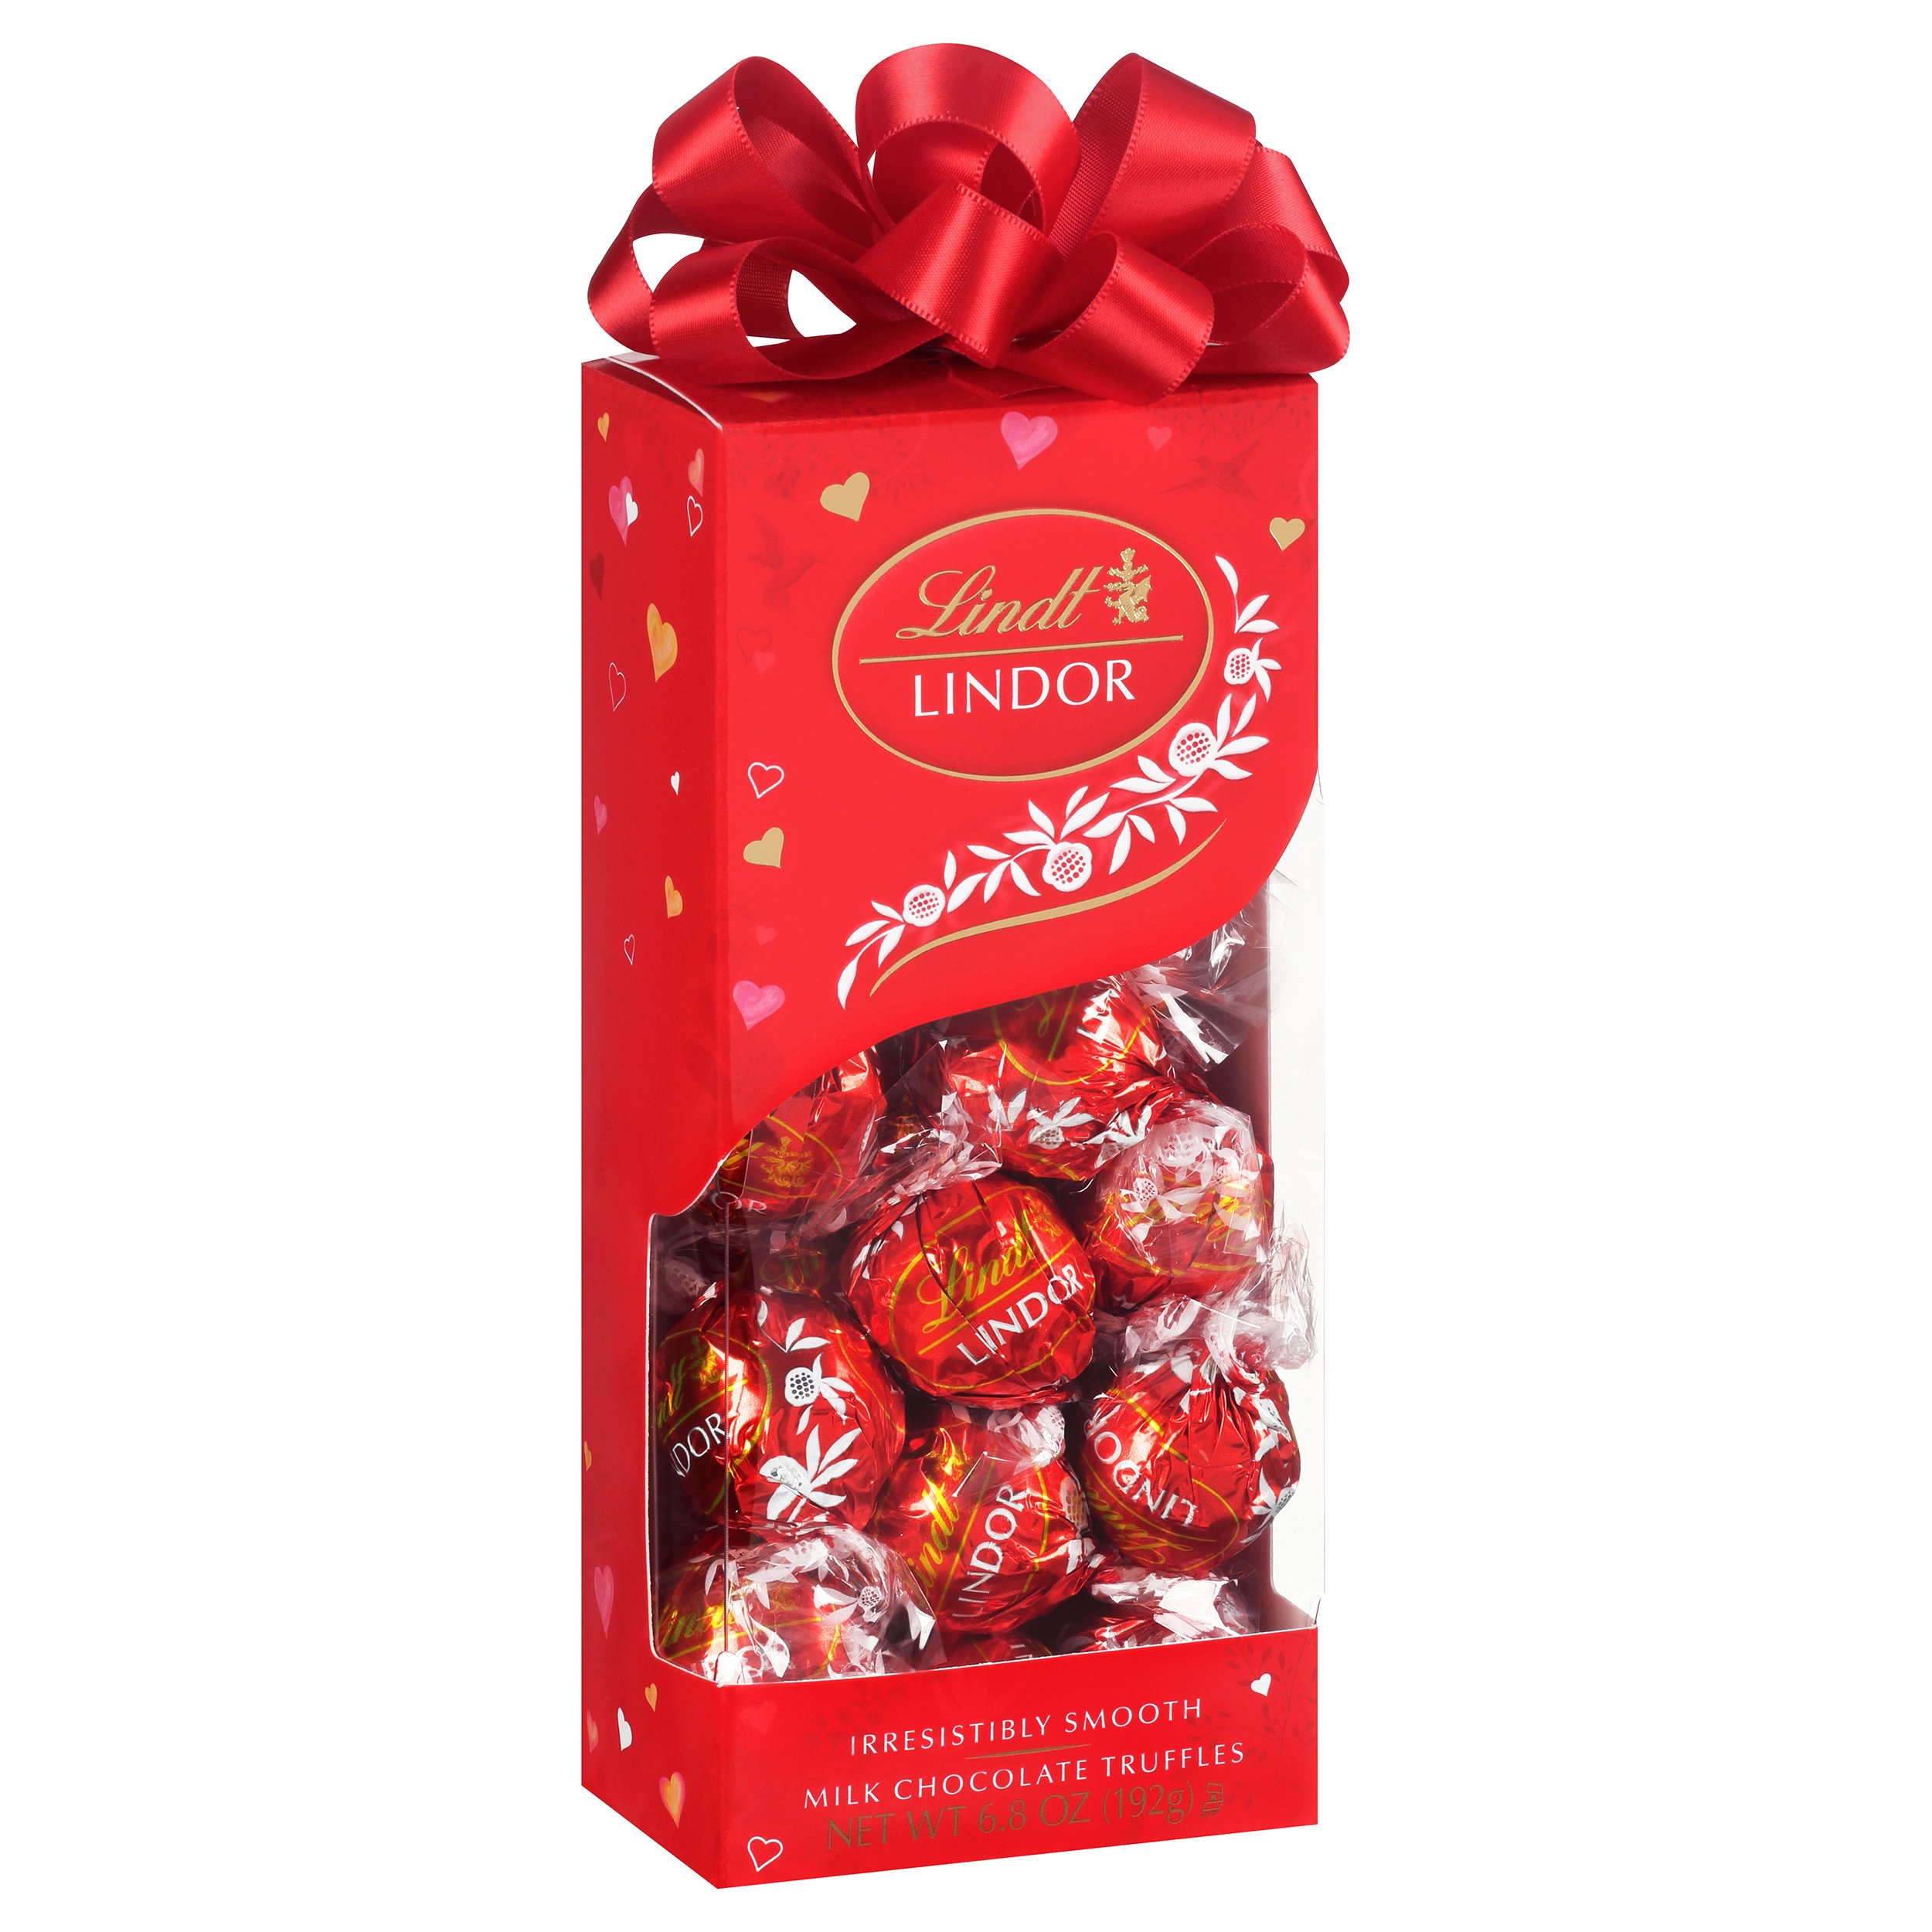 Lindt Lindor Milk Chocolate Truffles Valentines T Box Shop Candy At H E B 7964